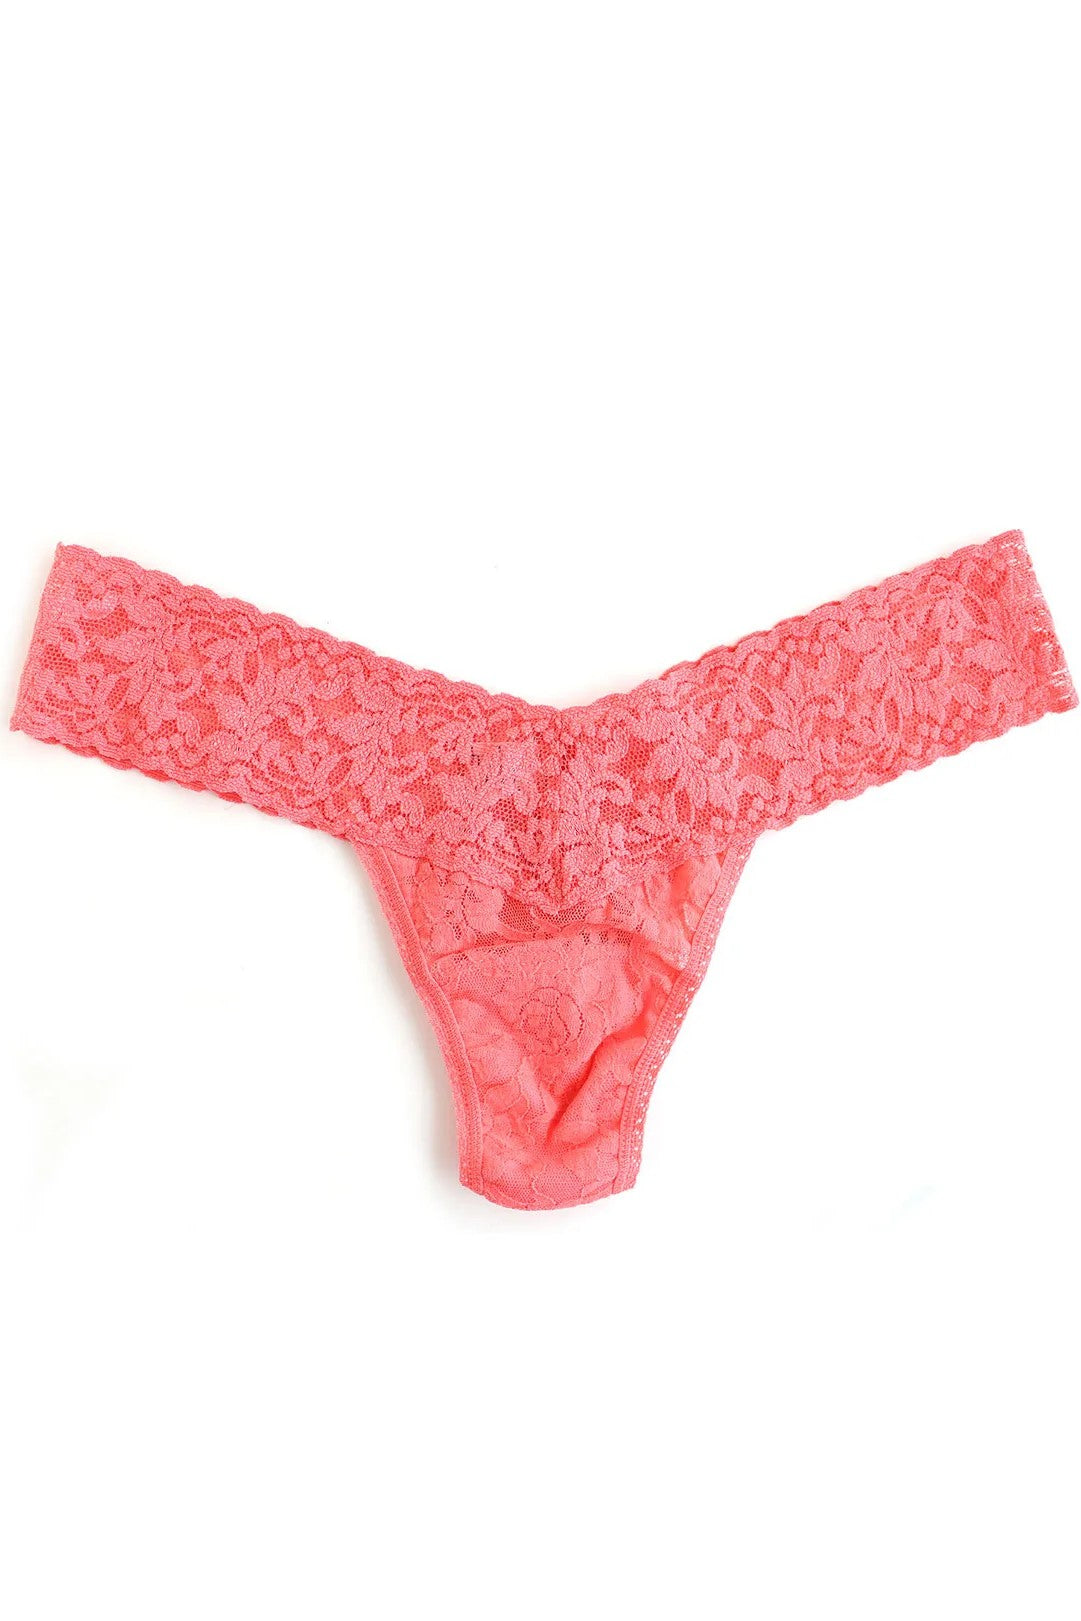 Hanky Panky Signature Lace Low Rise Thong OCRU buy for the best price CAD$  31.00 - Canada and U.S. delivery – Bralissimo